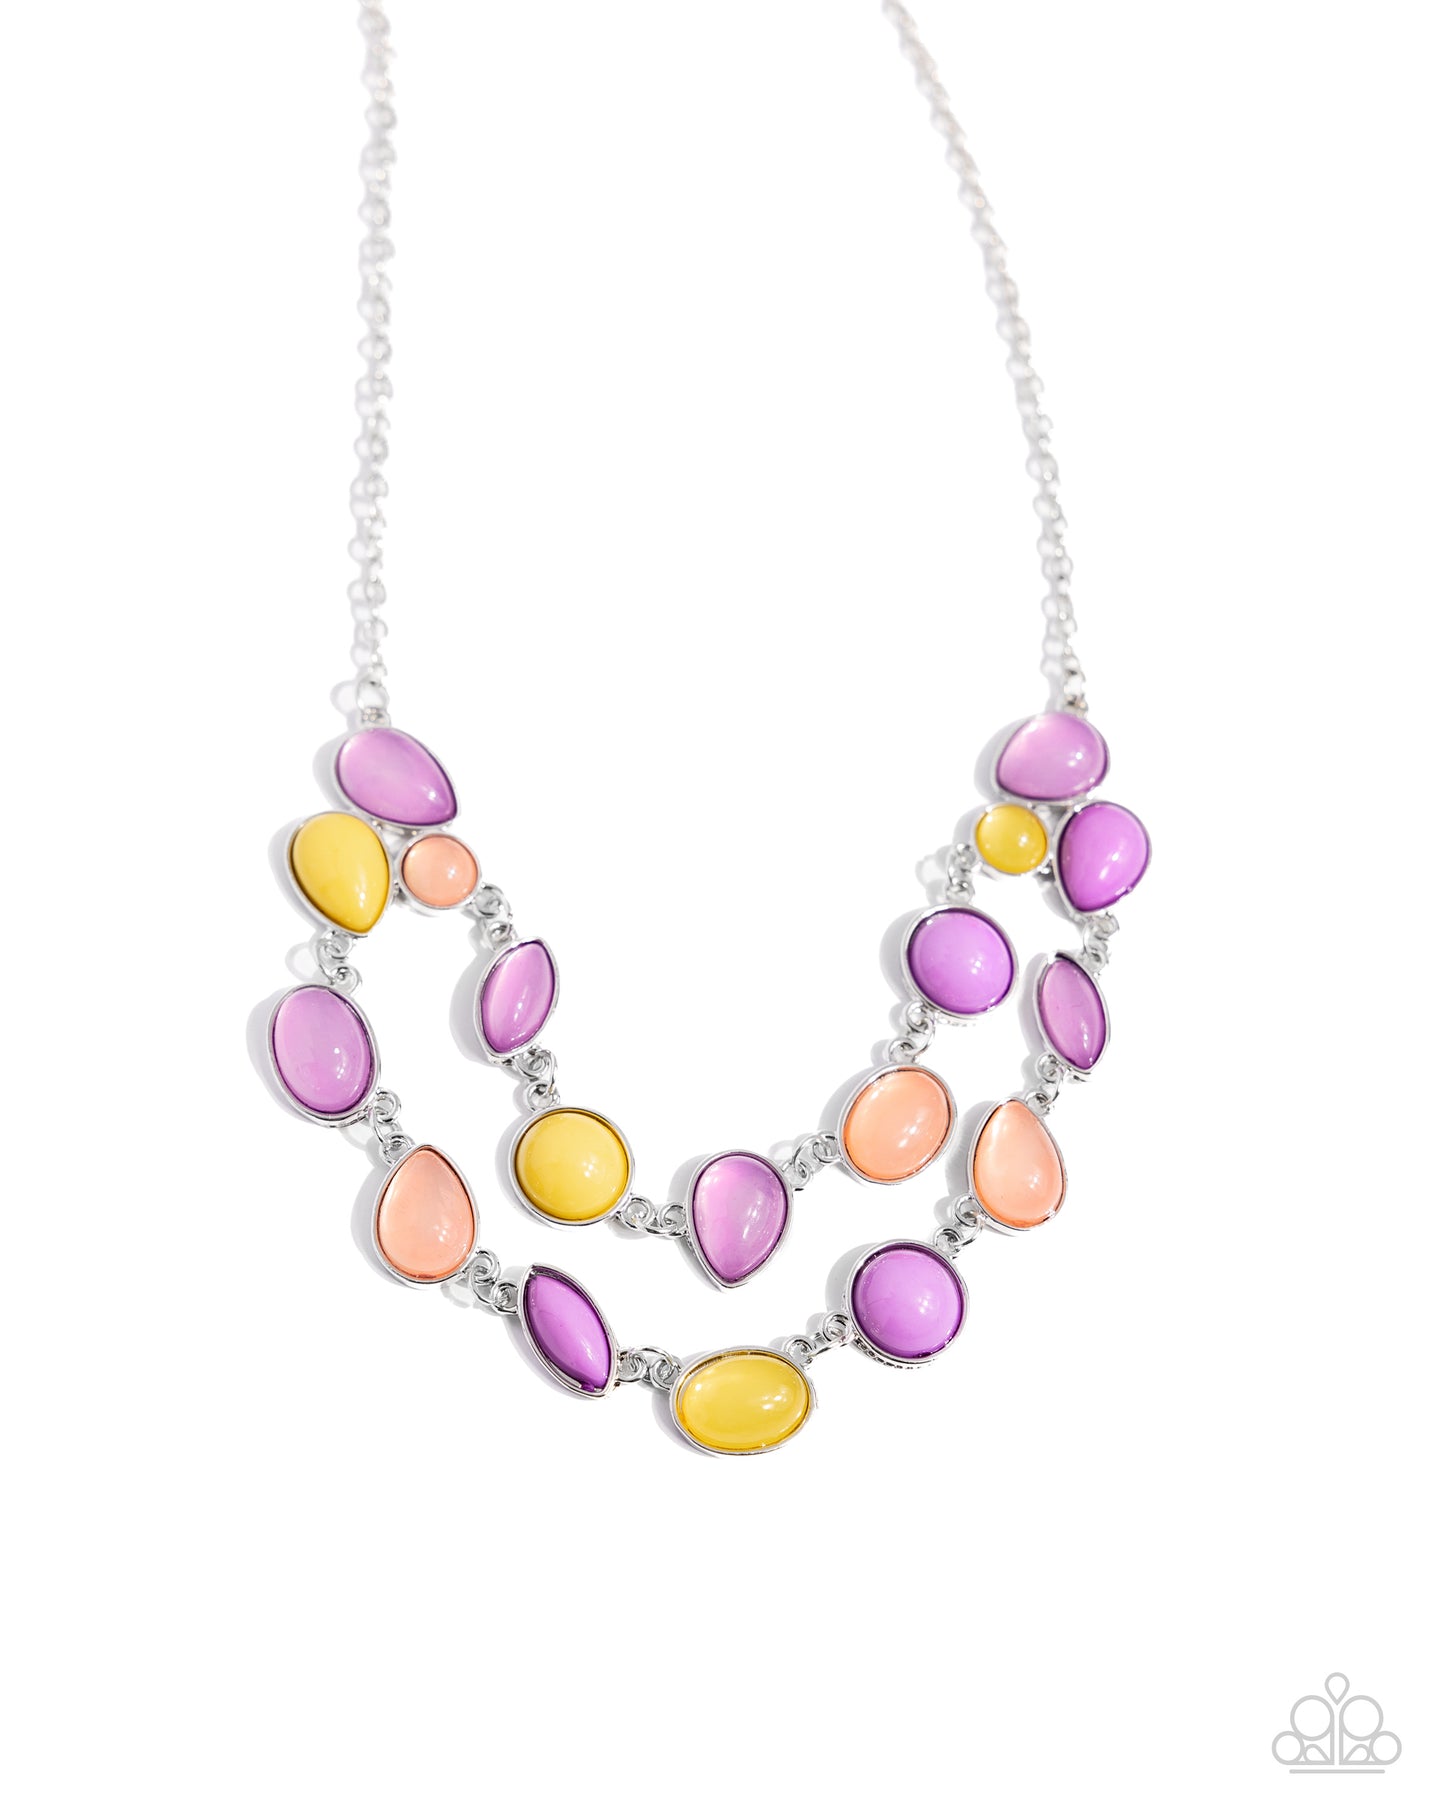 Paparazzi Accessories - Variety Vogue - Purple Necklaces a mismatched collection of glossy and opaque lavender, Desert Flower, and Lemon Drop teardrop, marquise, and round beads in silver frames delicately connect into a bubbly clustered pendant below the collar, creating a colorful statement piece. Features an adjustable clasp closure. Sold as one individual necklace. Includes one pair of matching earrings.